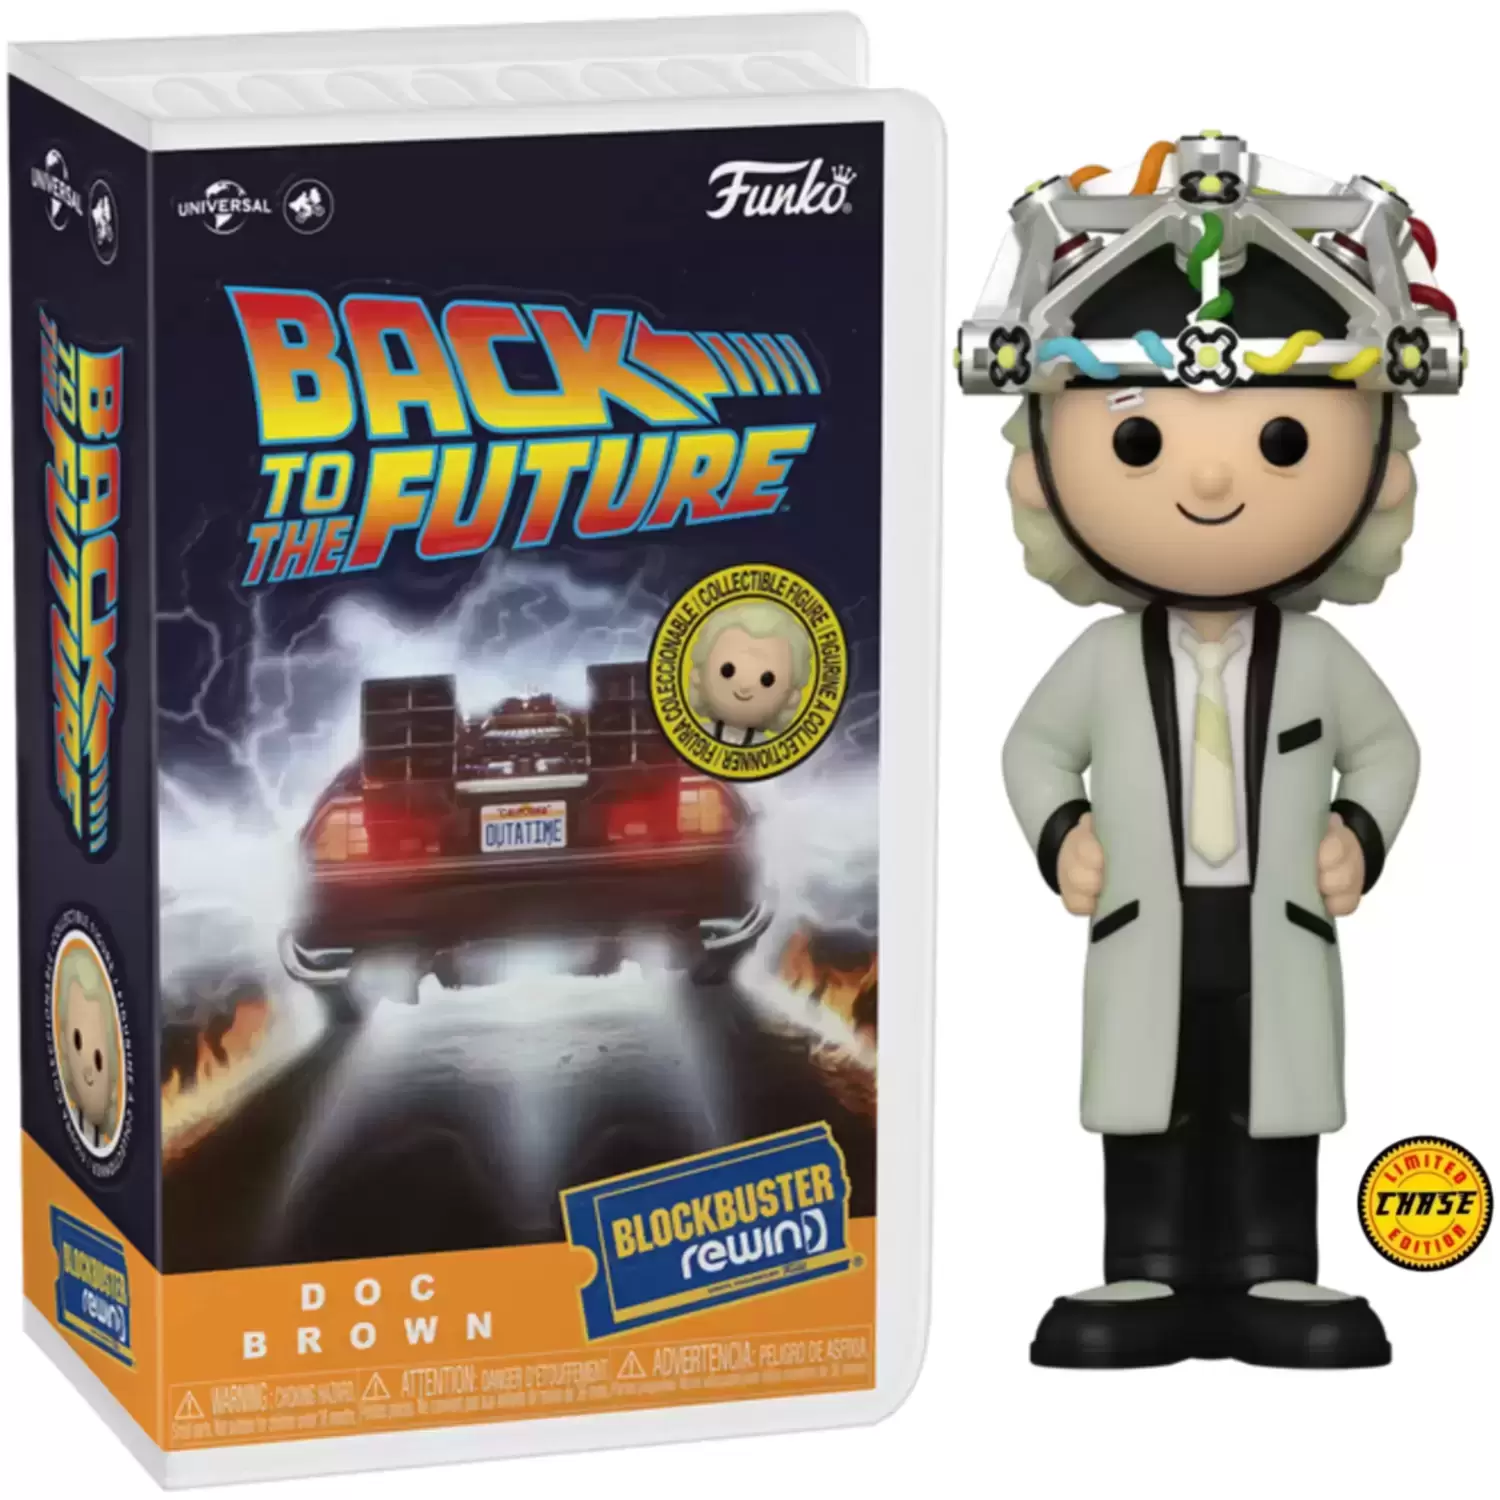 Blockbuster Rewind - Back To The Future - Doc Brown Chase